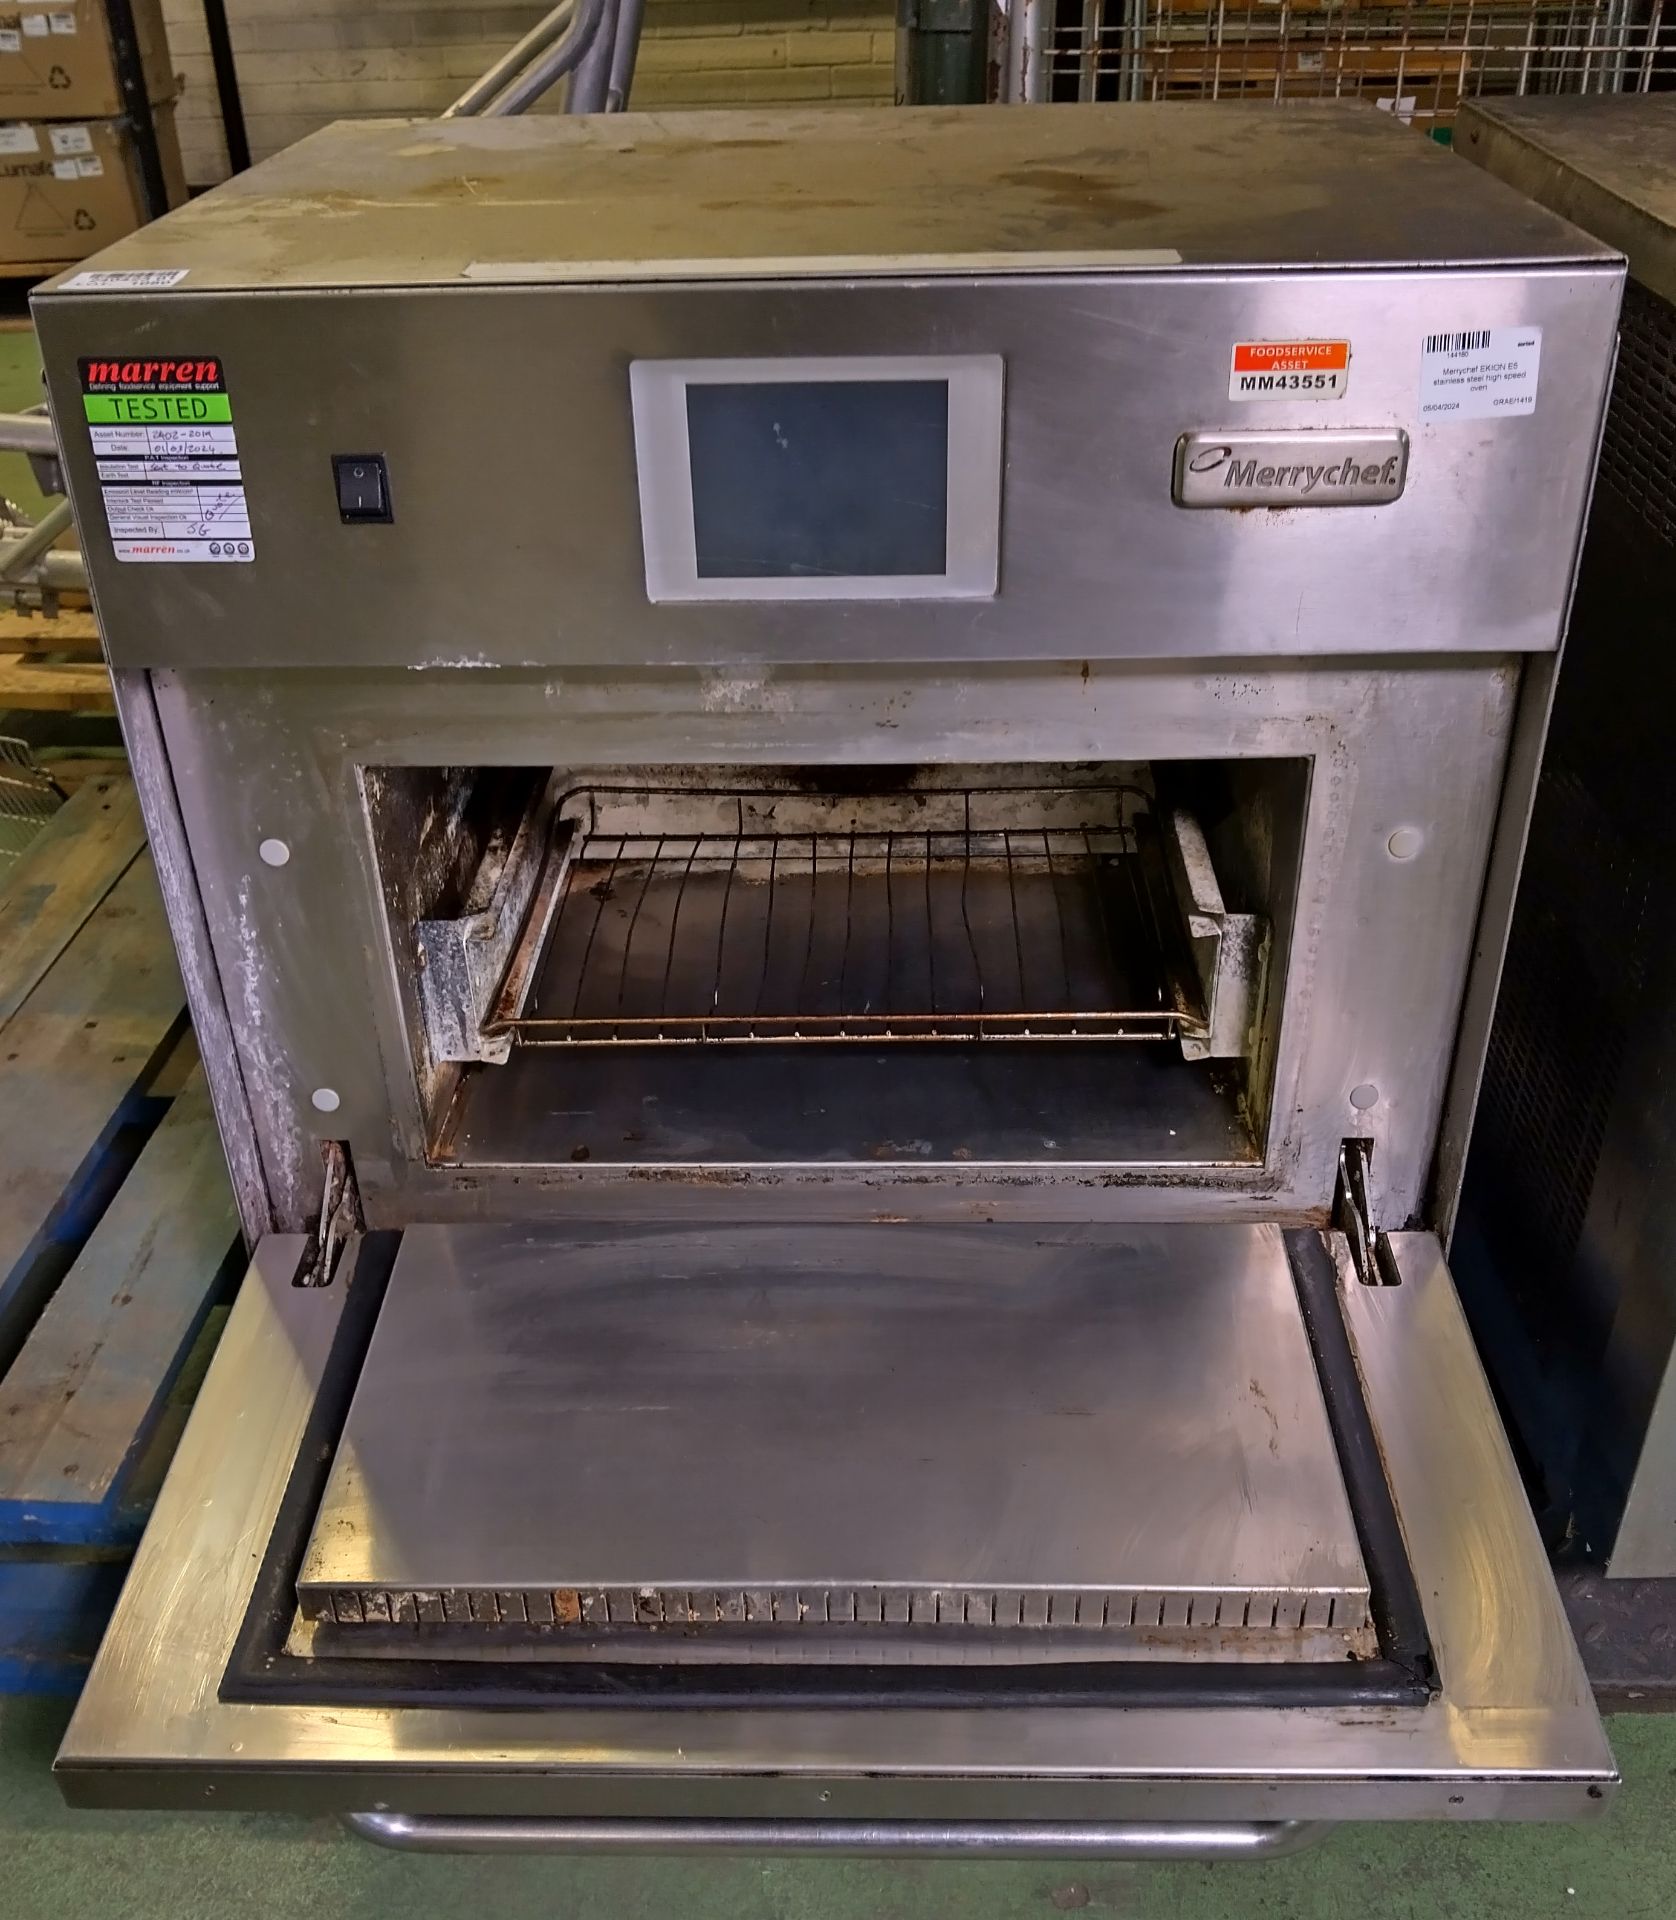 Merrychef Eikon E5 stainless steel high speed oven - Image 3 of 3